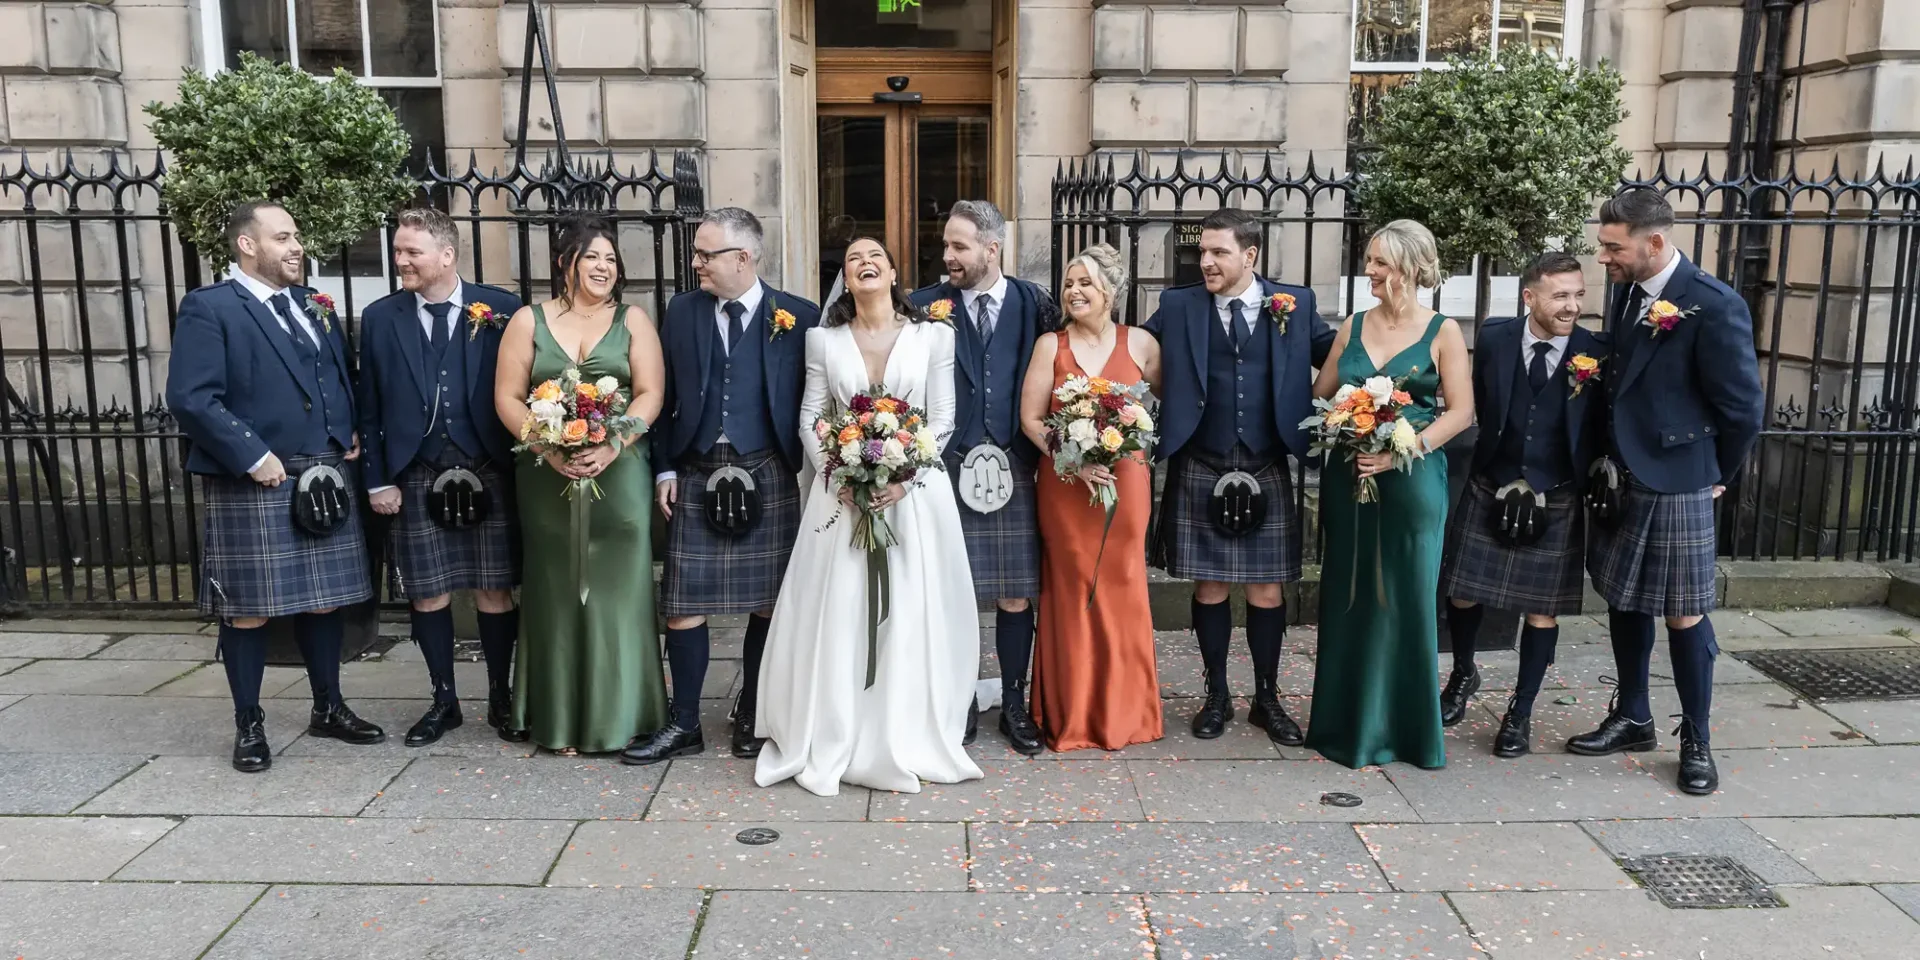 Wedding group laughing together on city sidewalk, featuring several men in kilts and women in dresses, with bouquets.